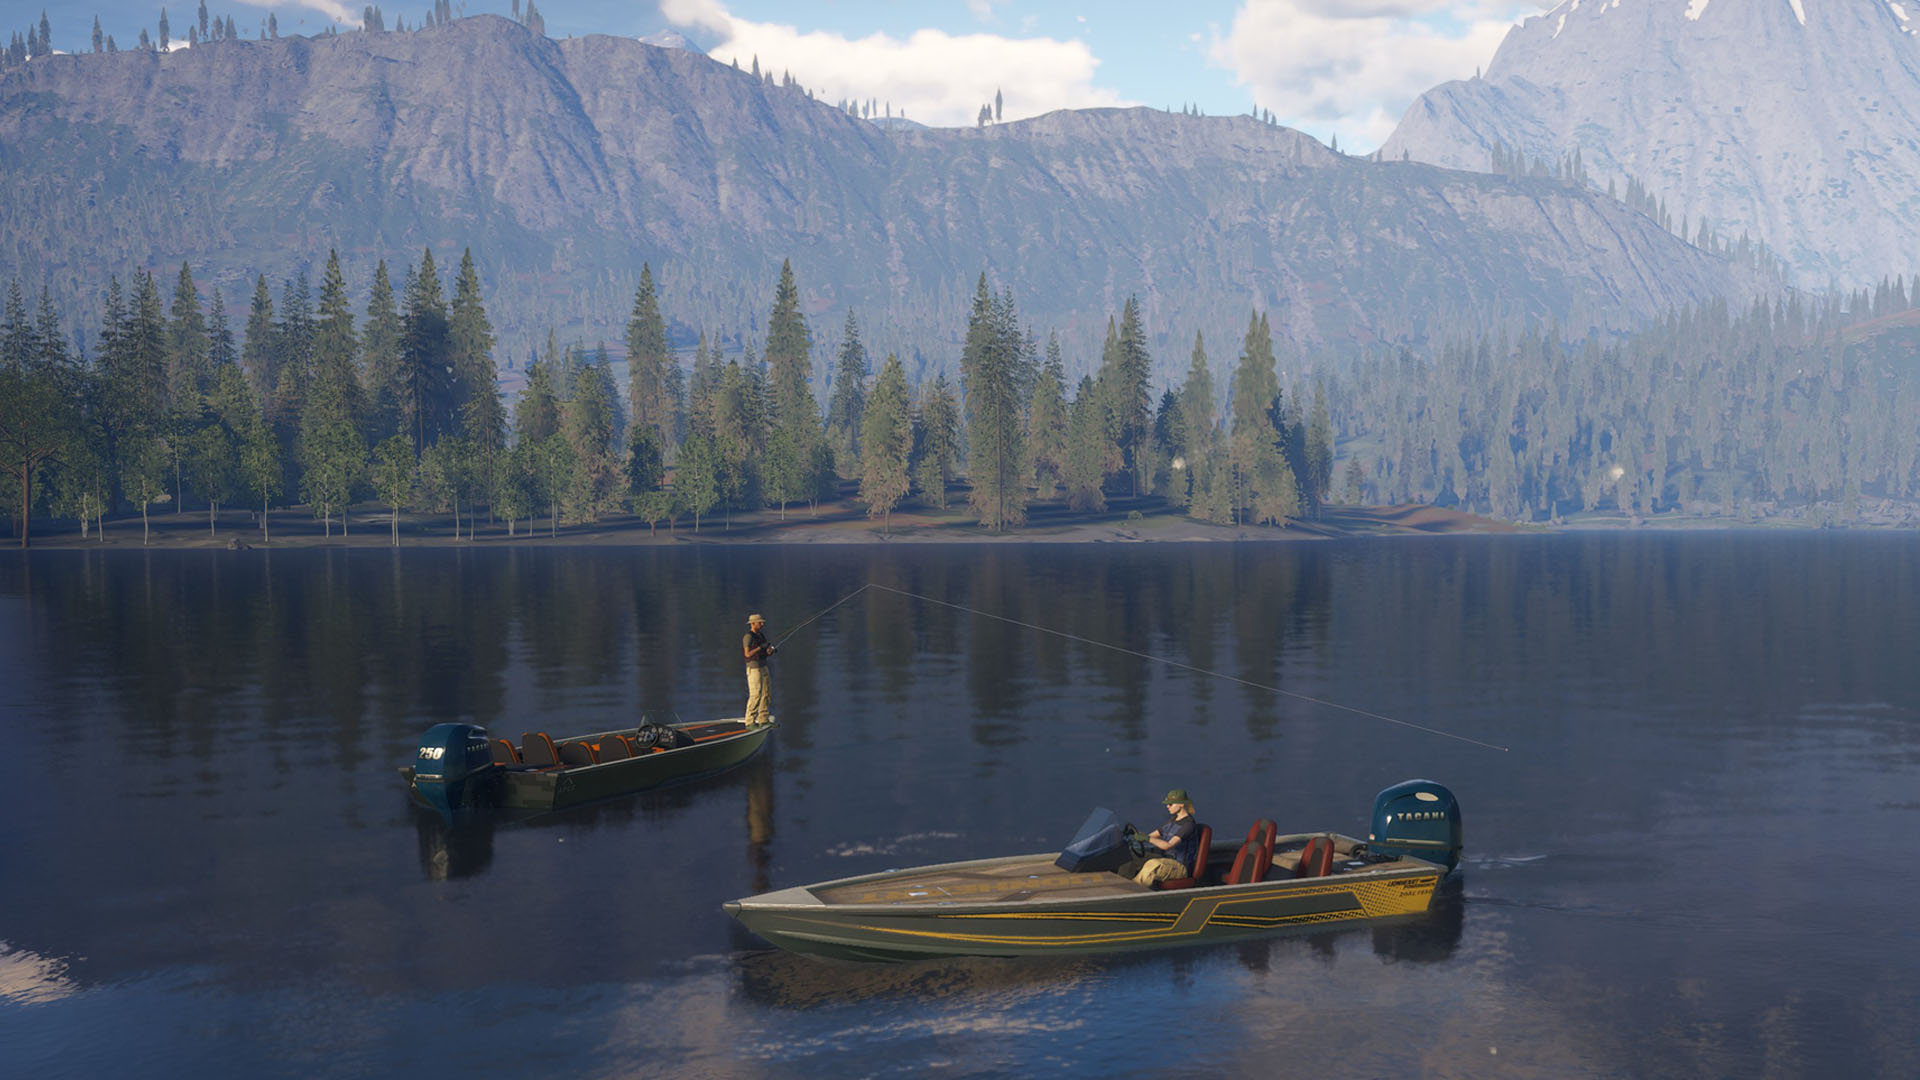 Players fishing together on the water equipped with cosmetics from the Wilderness Cosmetic Pack.